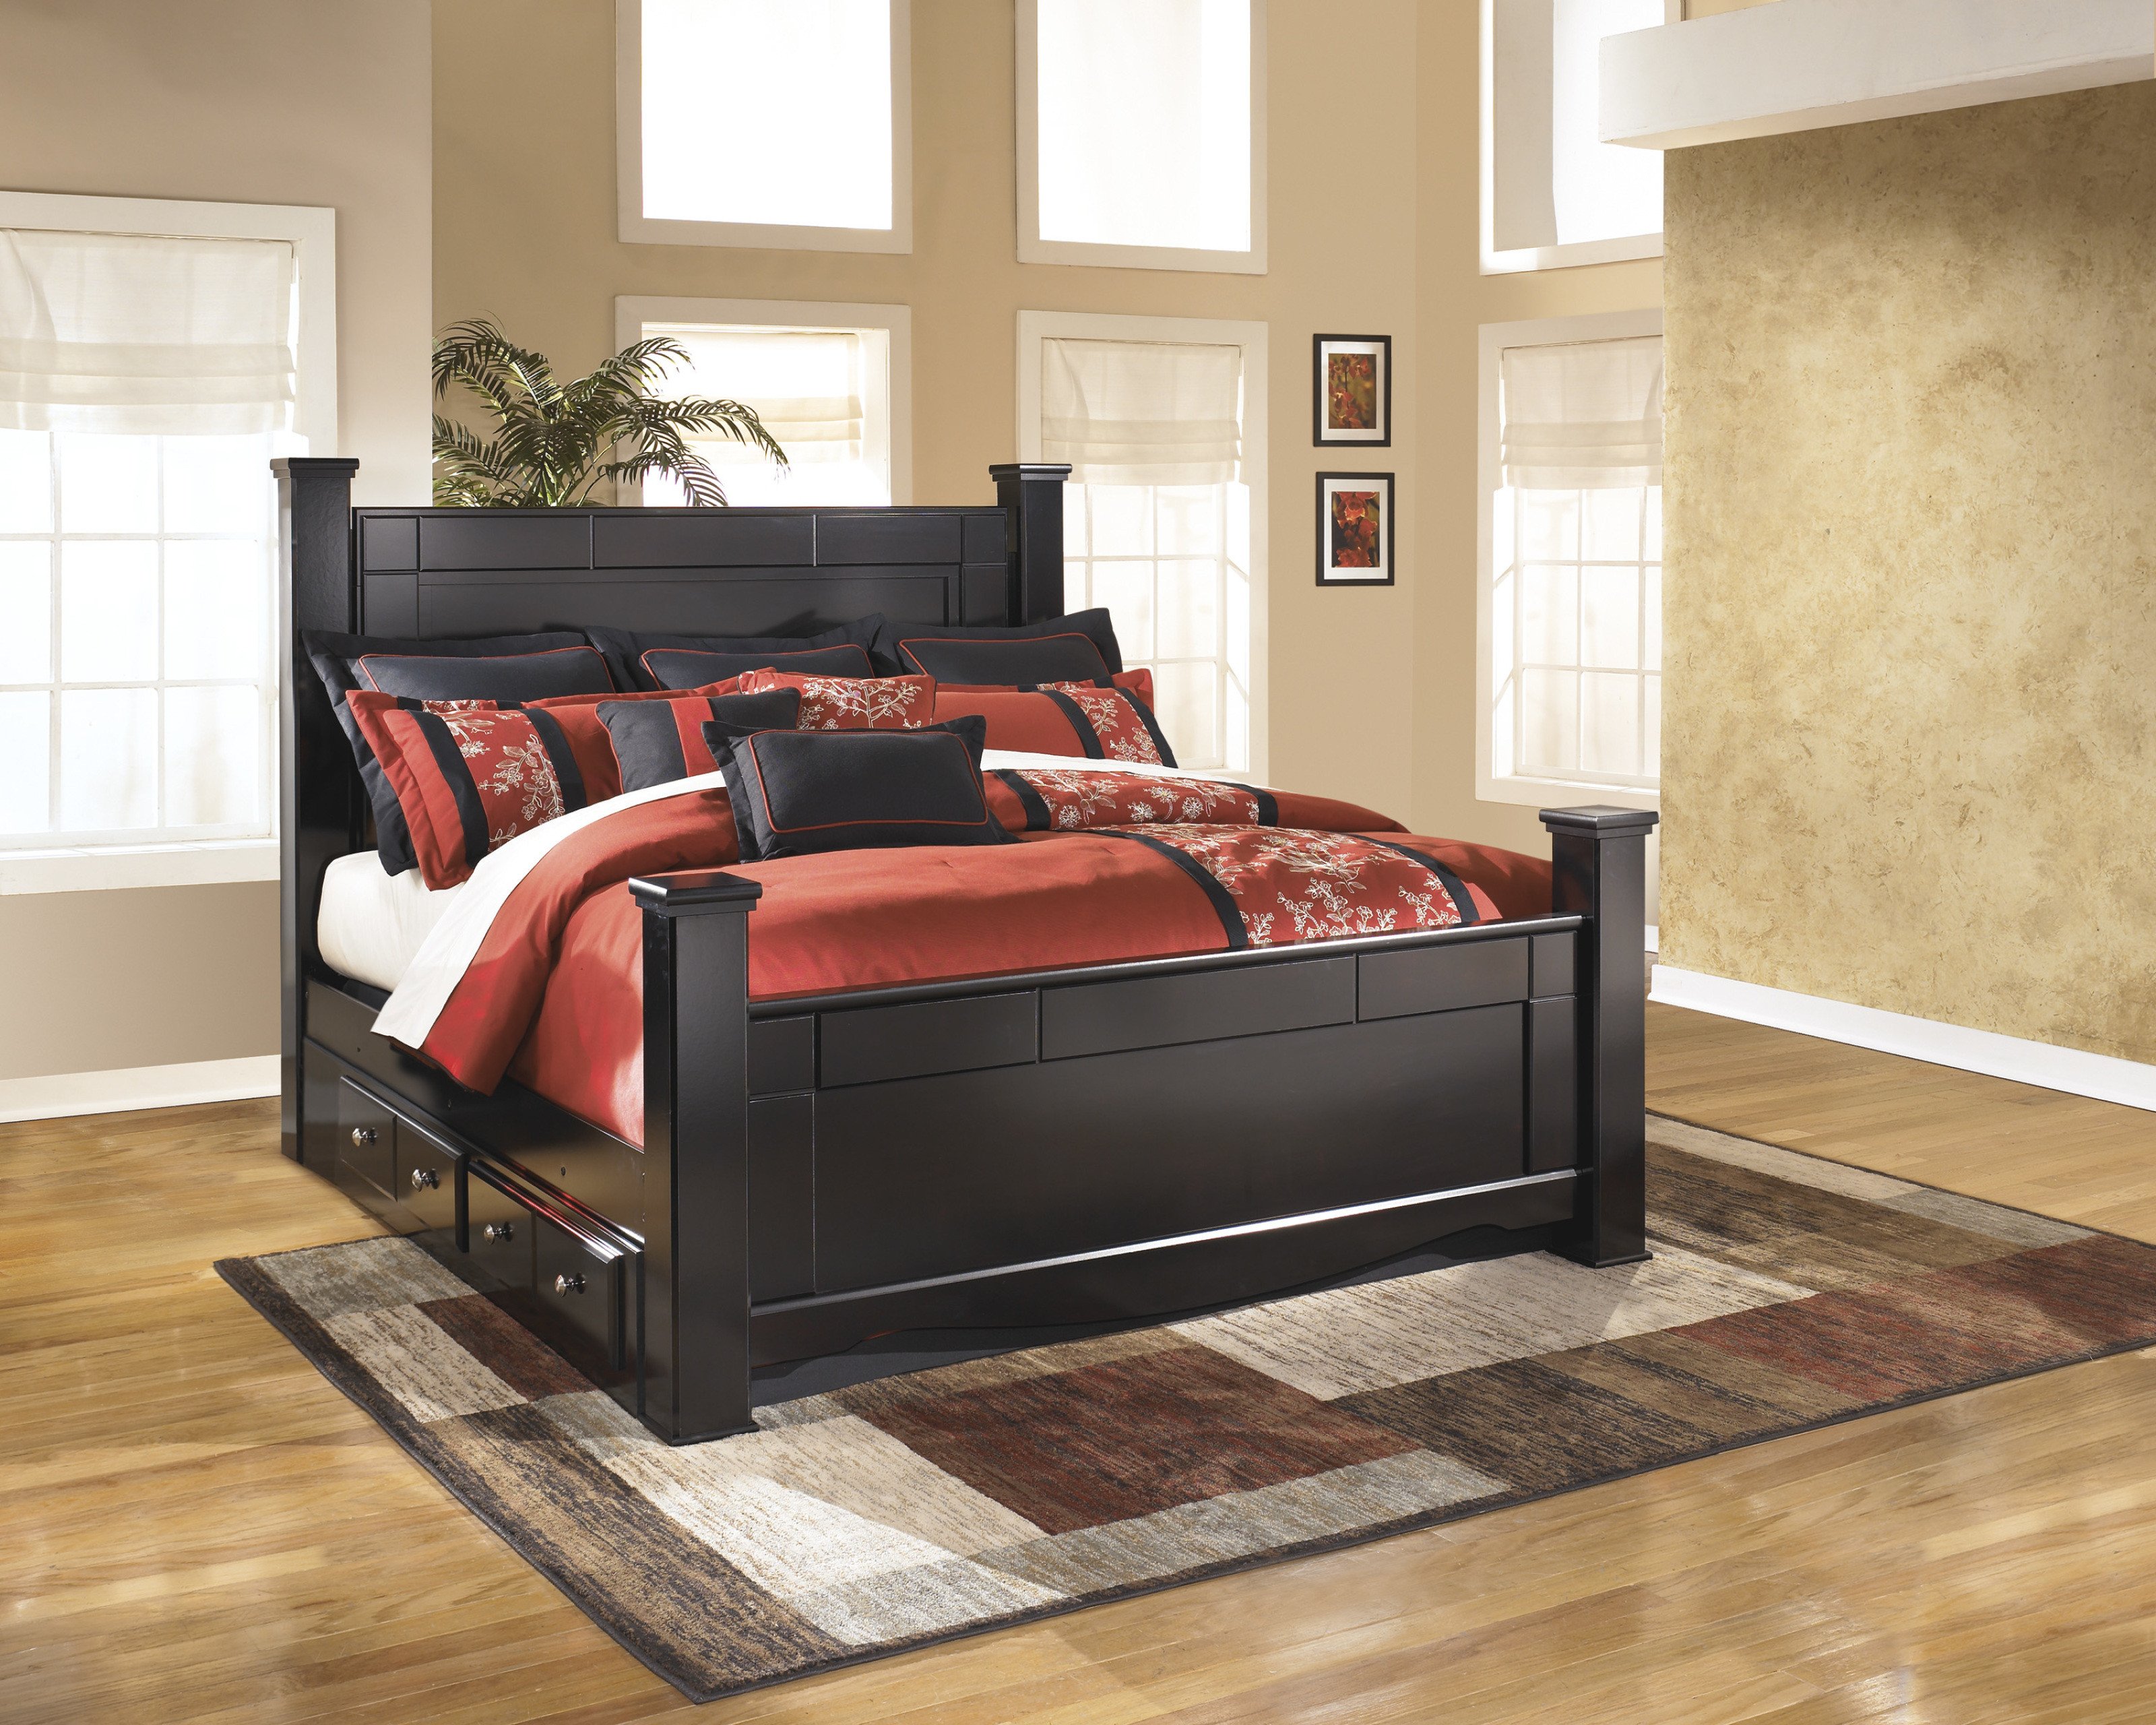 Signature Design by ashley Bedroom Set Awesome ashley Signature Shay B271 Poster Bed